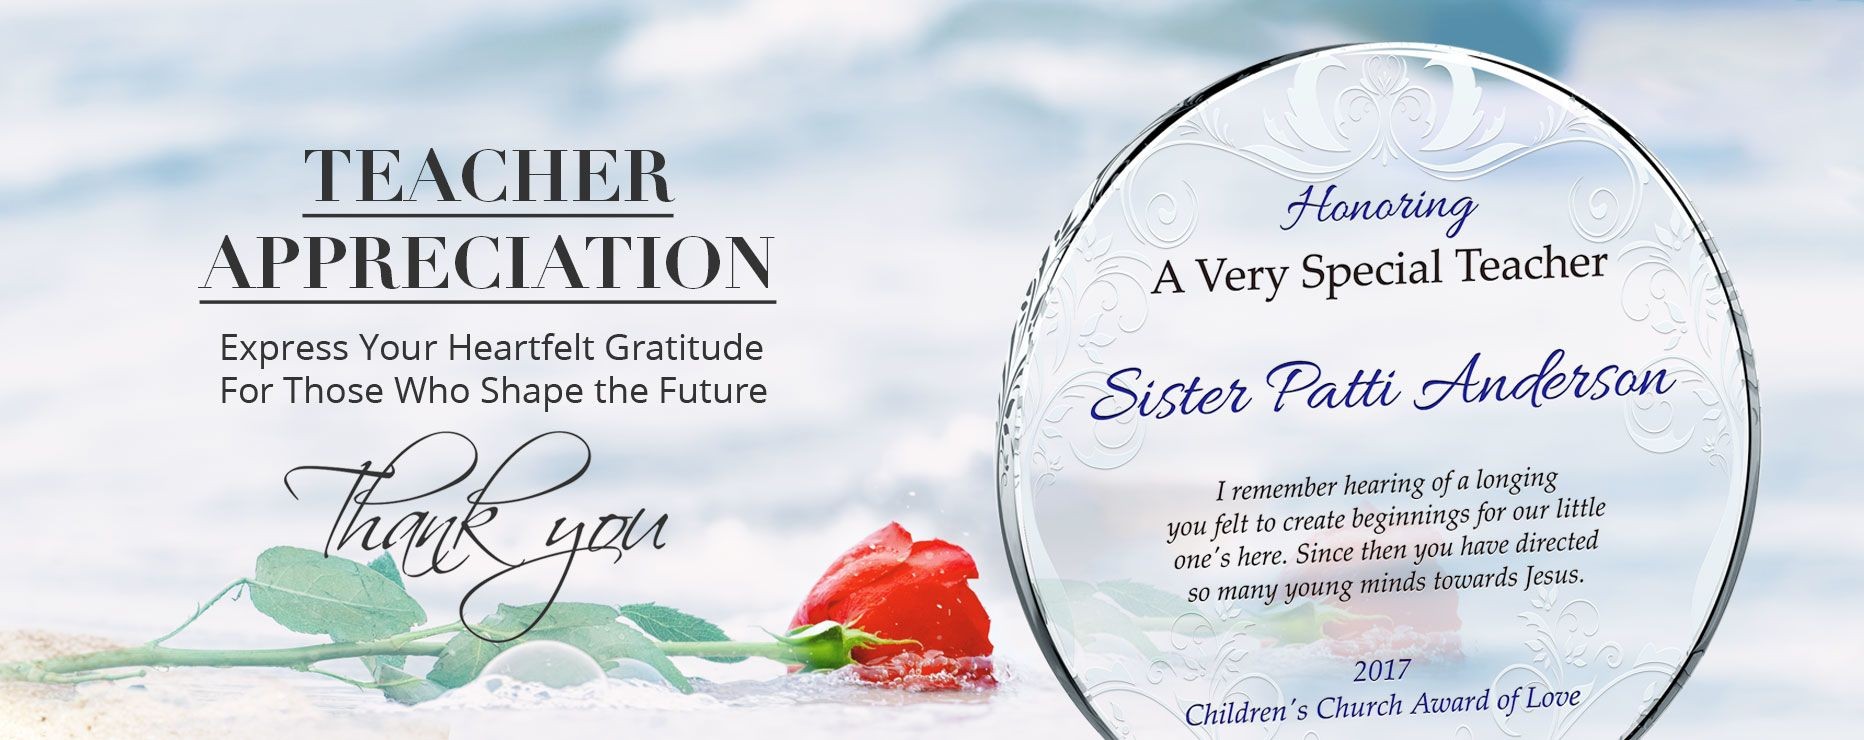 Teacher Appreciation Wording Ideas And Sample Layouts DIY Awards Certificate Of For Teachers